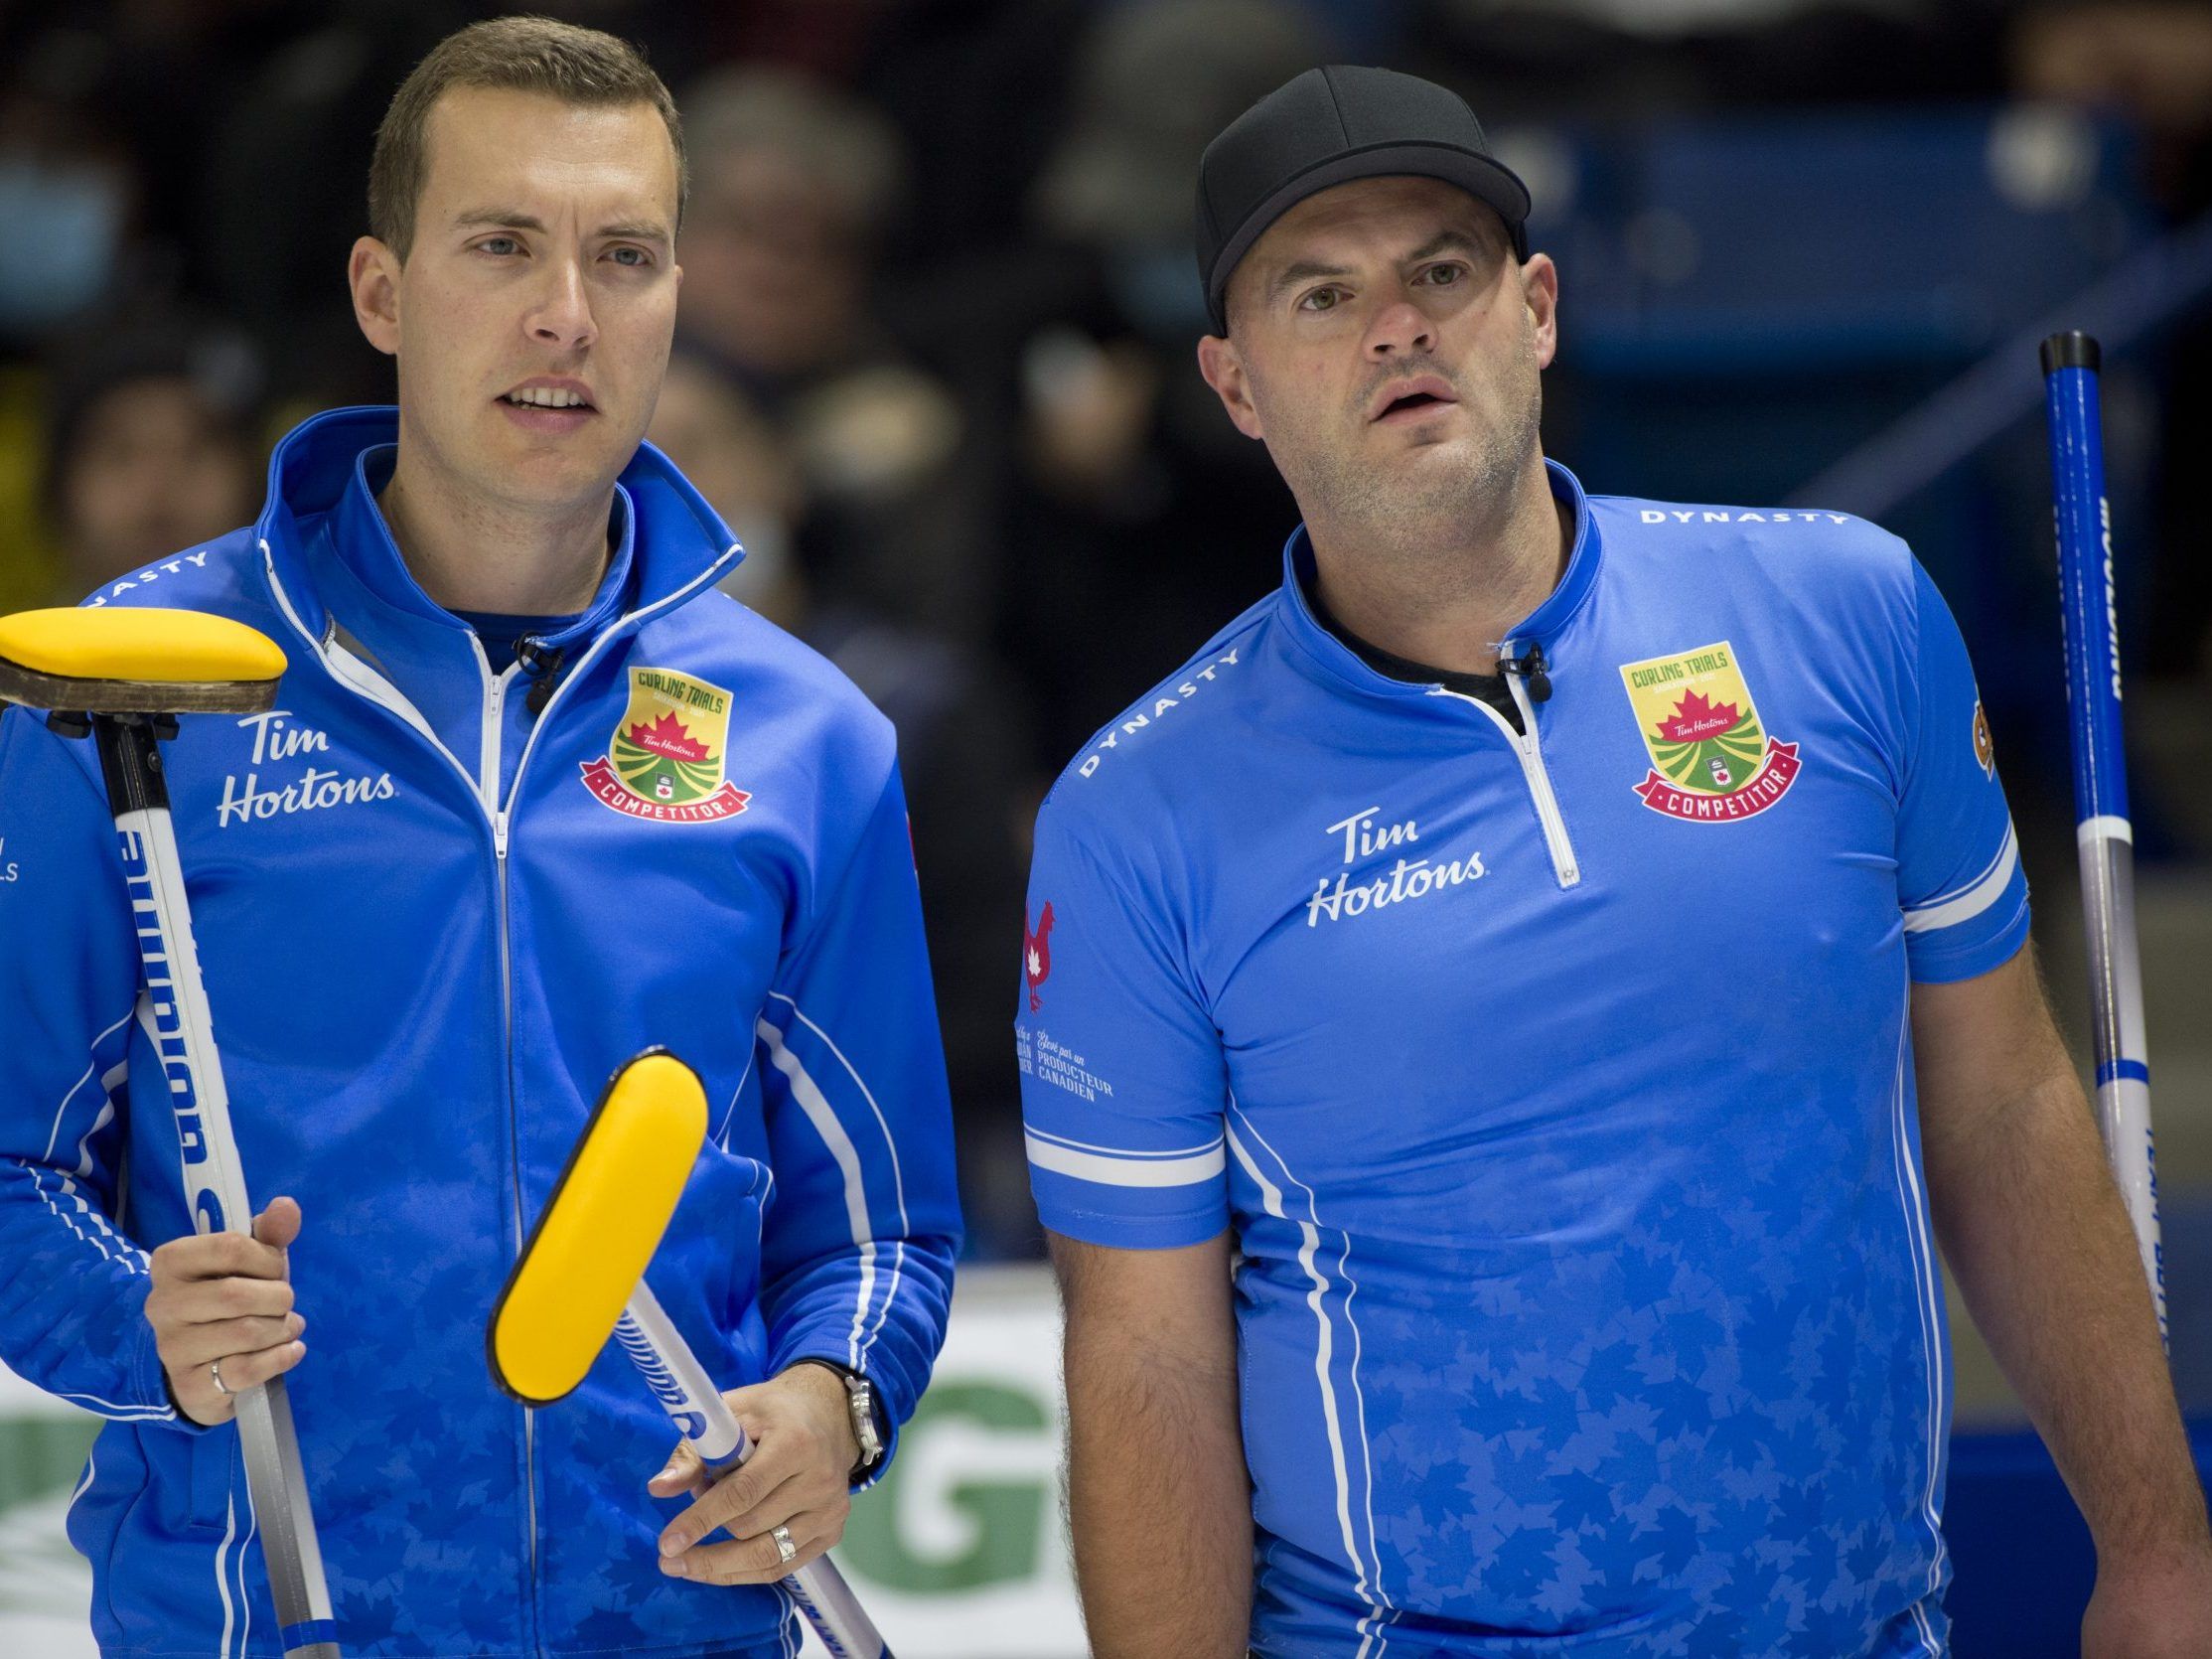 Bottcher defends decision to cut third Moulding, says it was about team ...